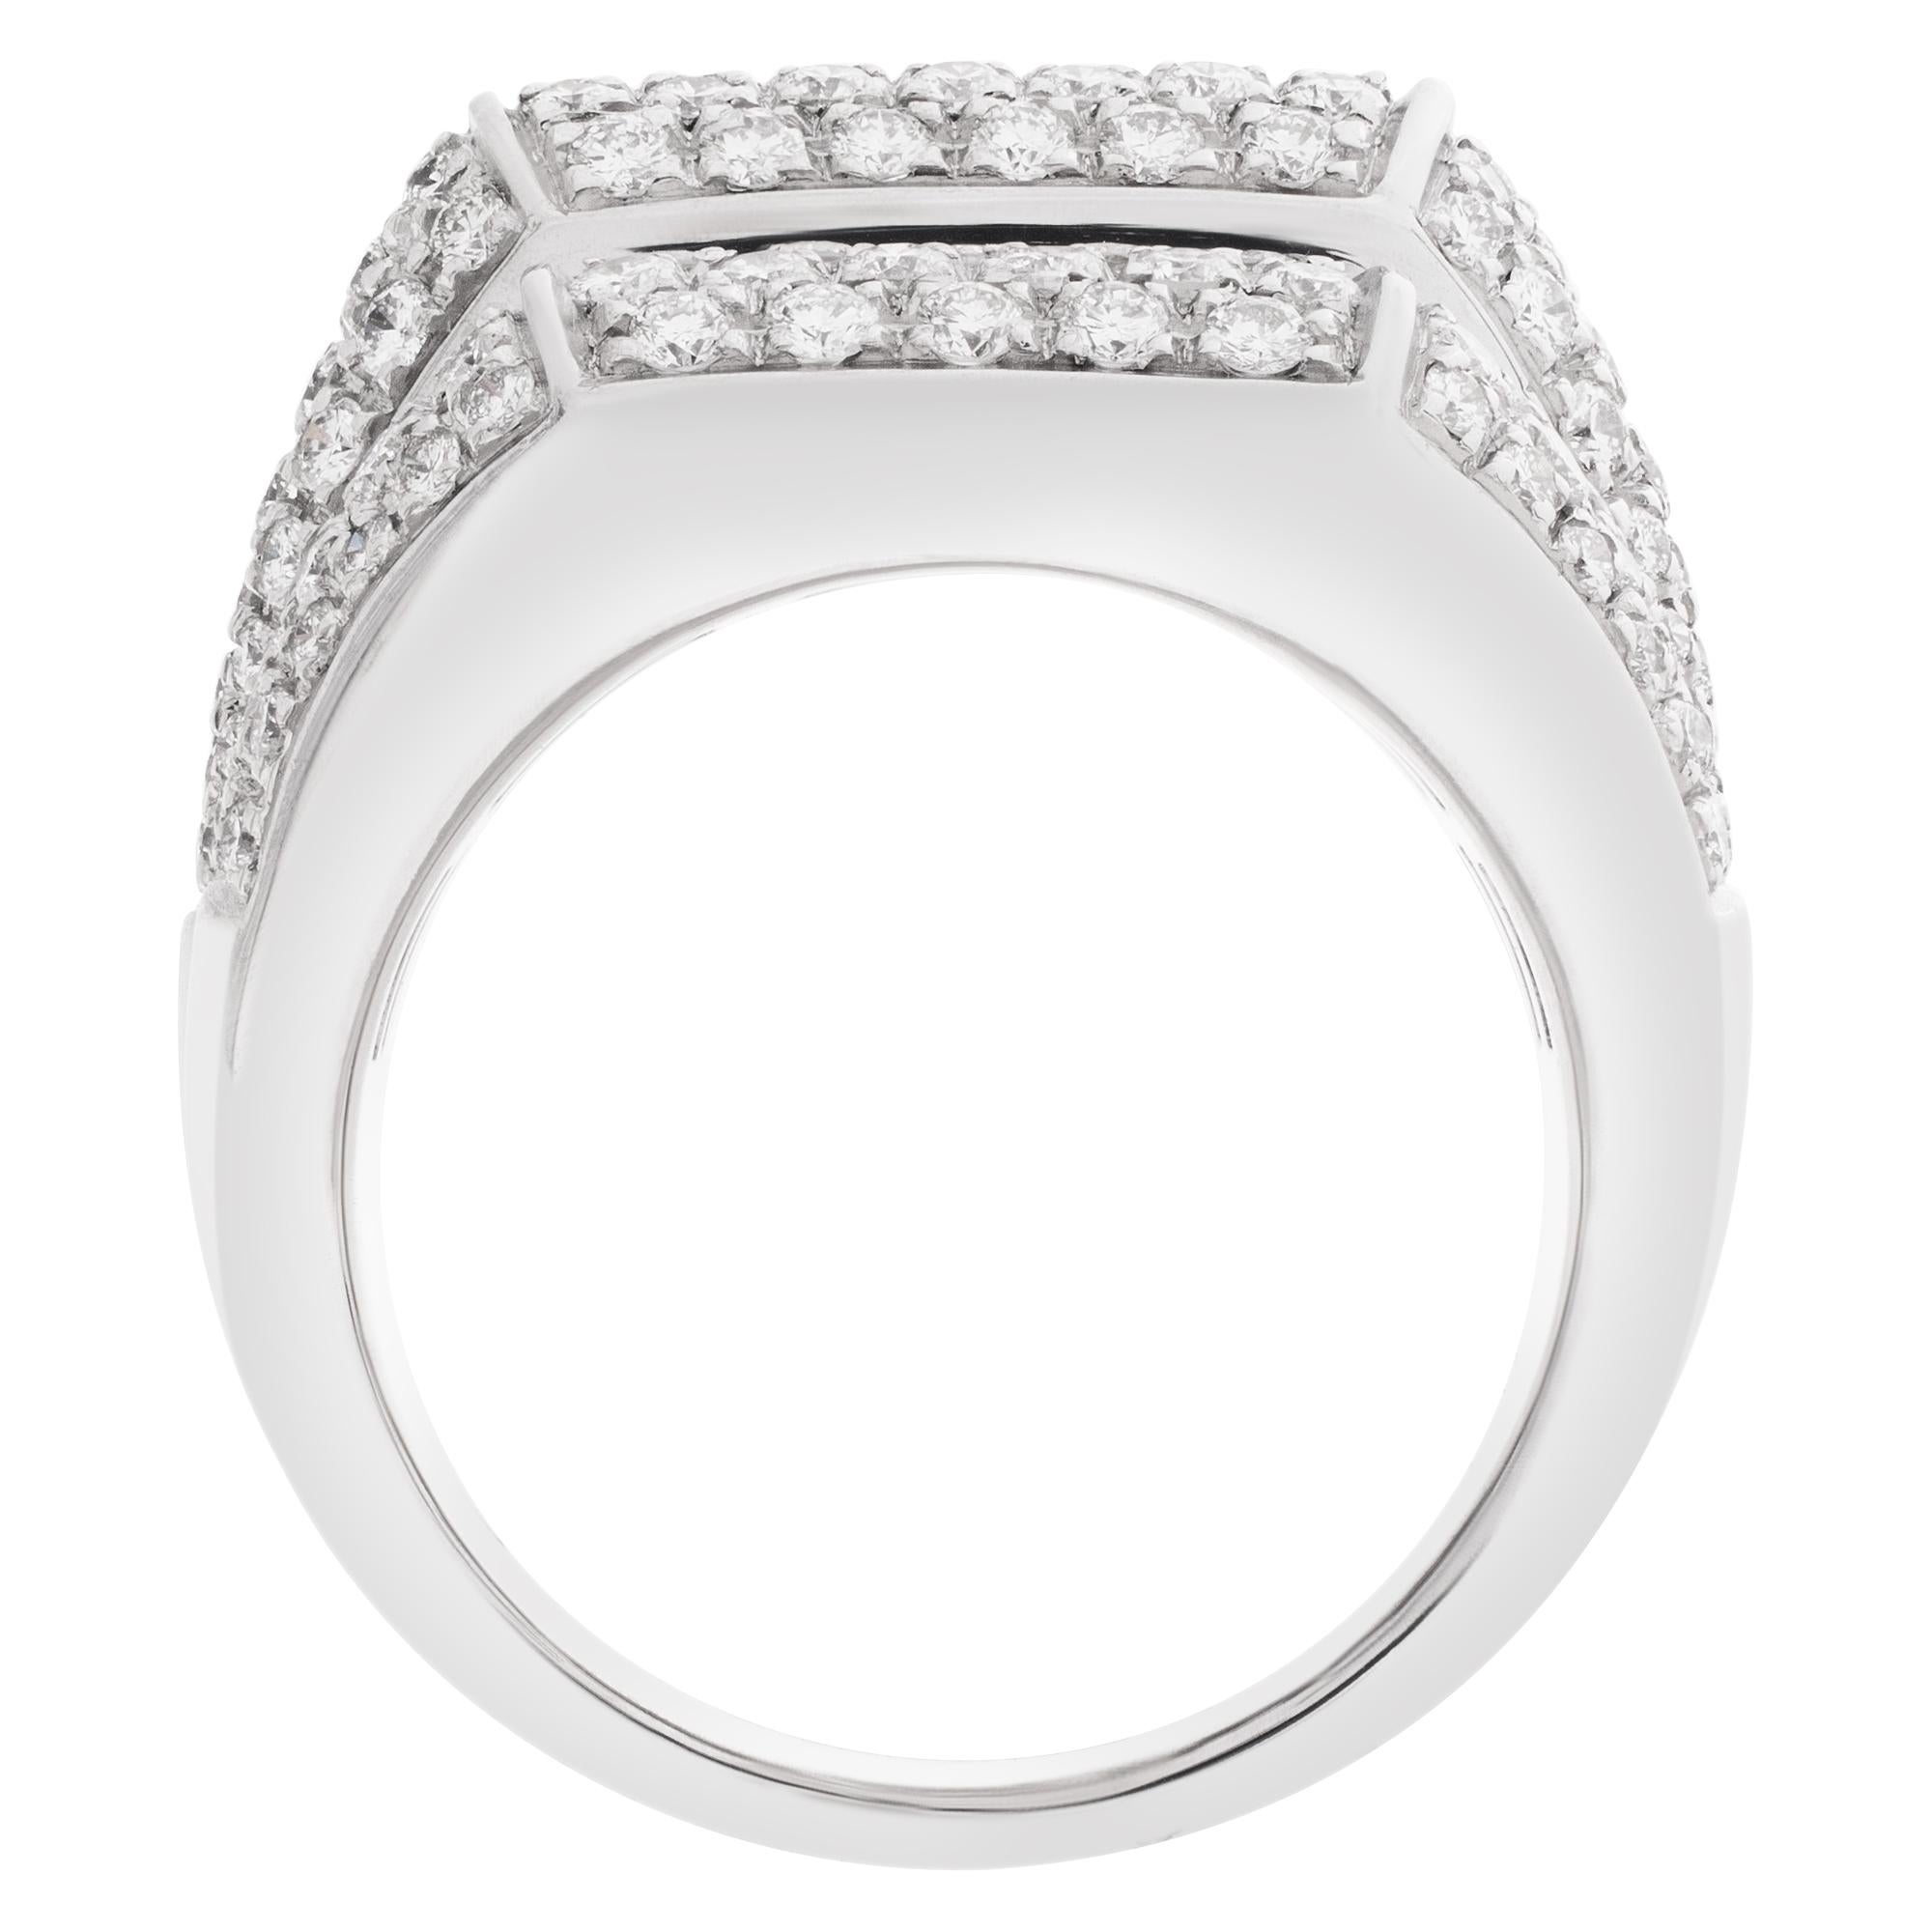 Women's Three-Row Pave Diamond Ring in 18k White Gold For Sale